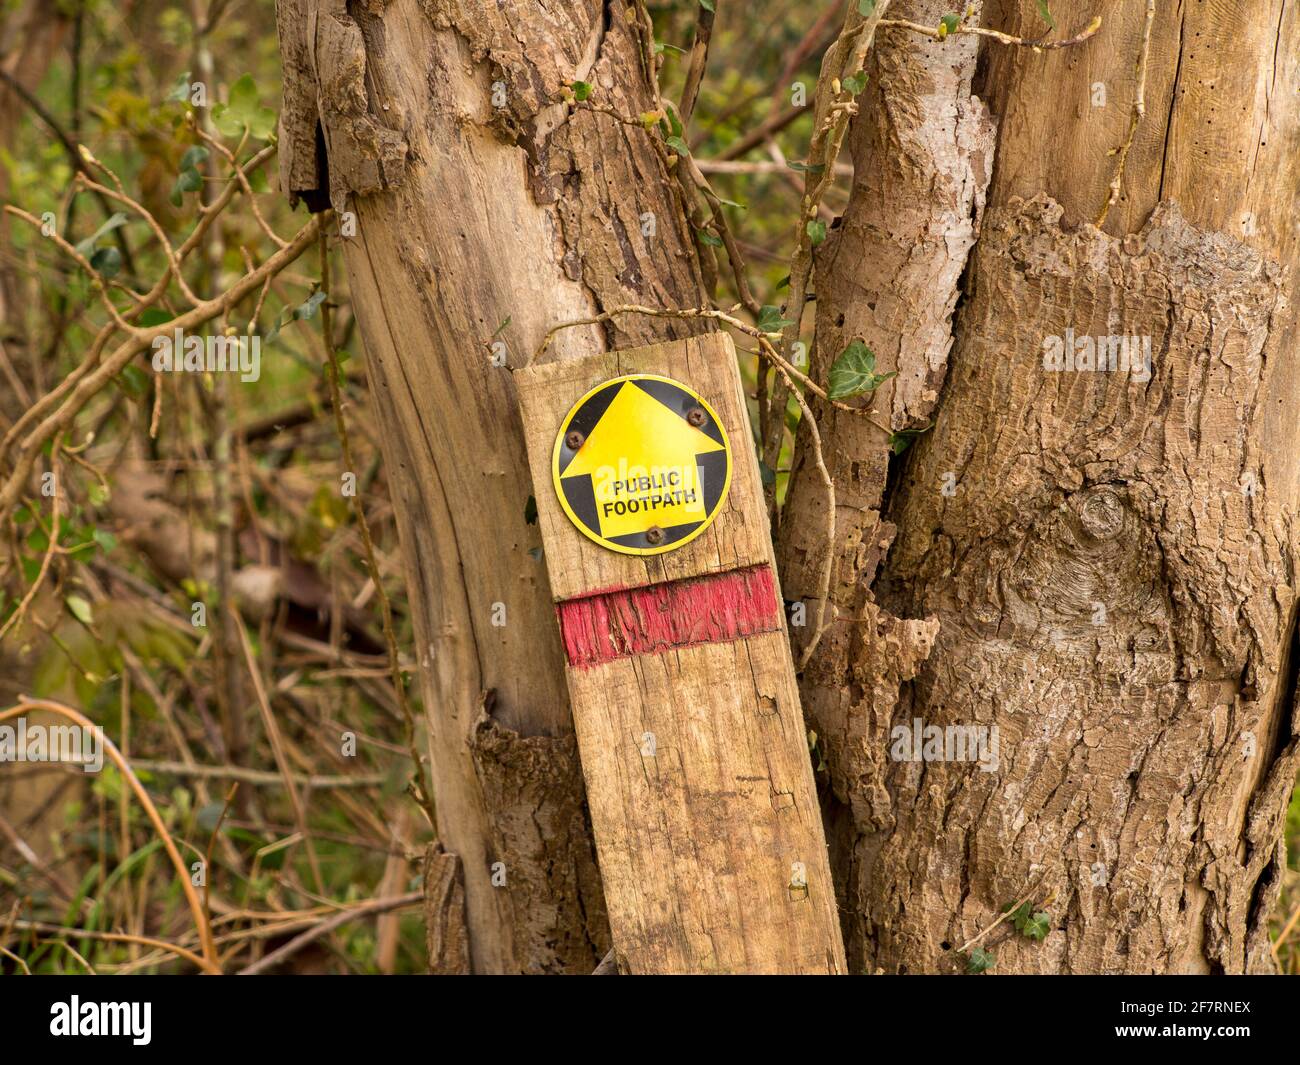 A broken footpath sign in the country laying useless against a tree Stock Photo